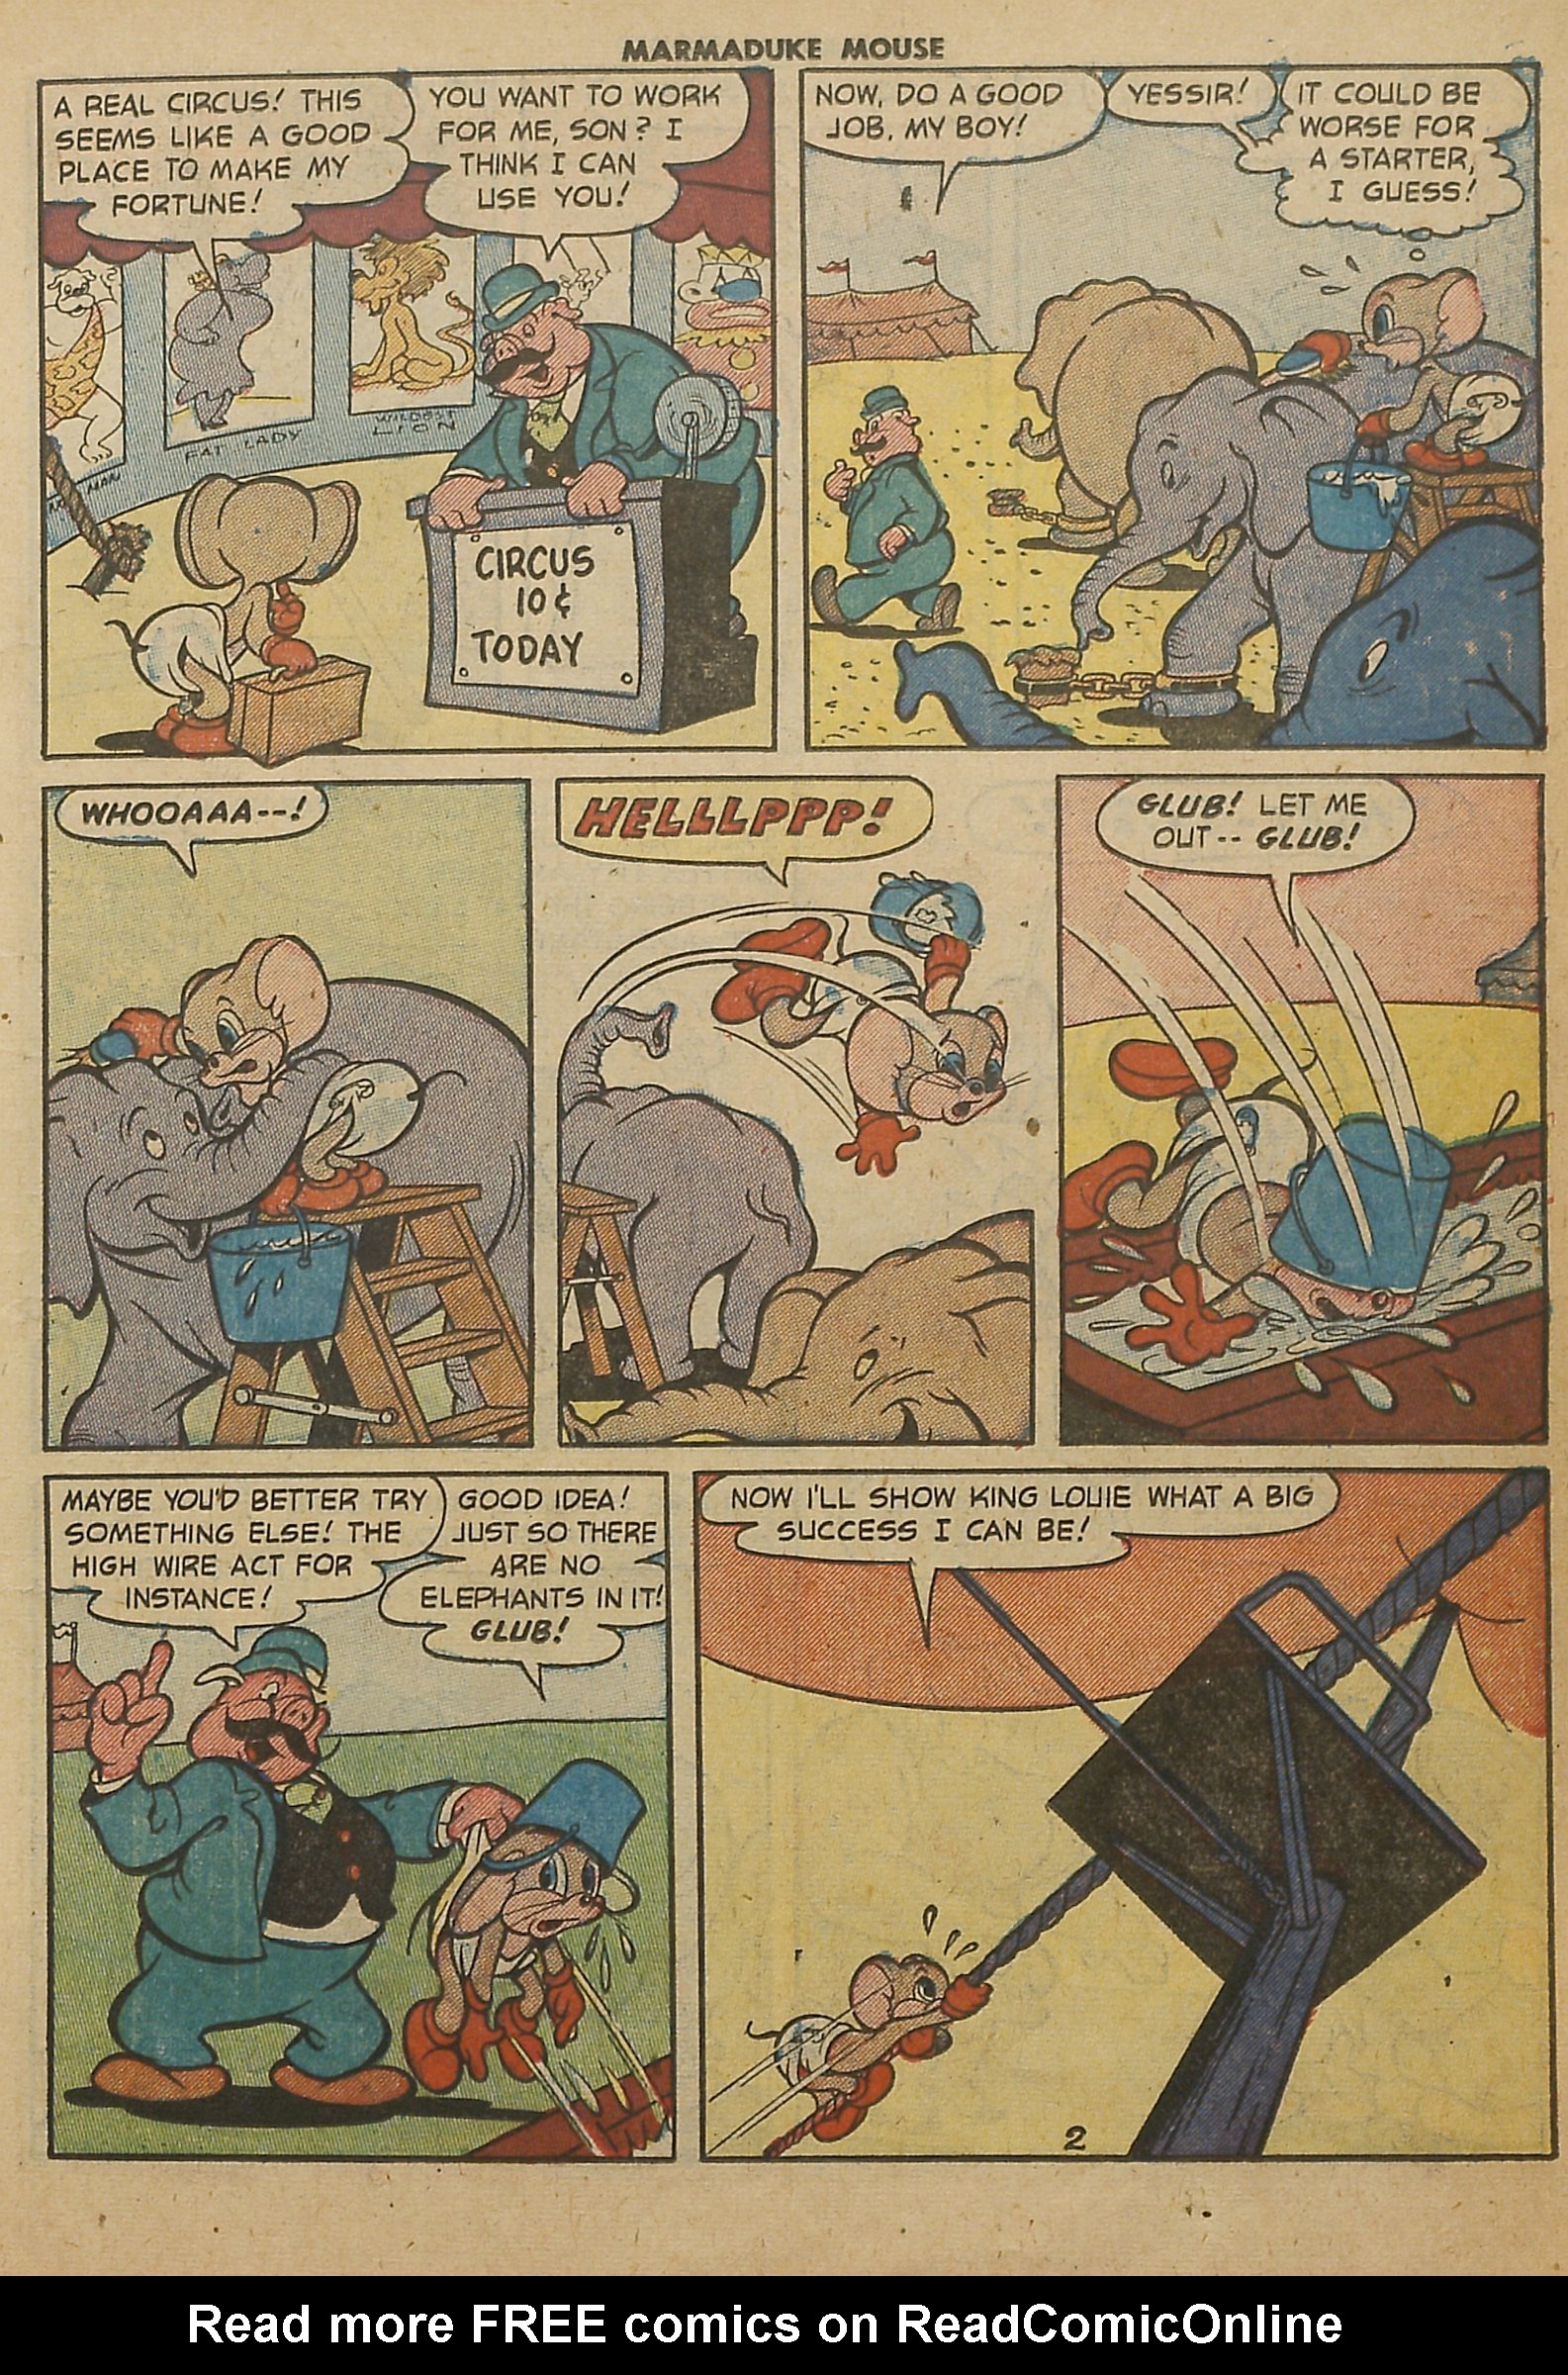 Read online Marmaduke Mouse comic -  Issue #37 - 15